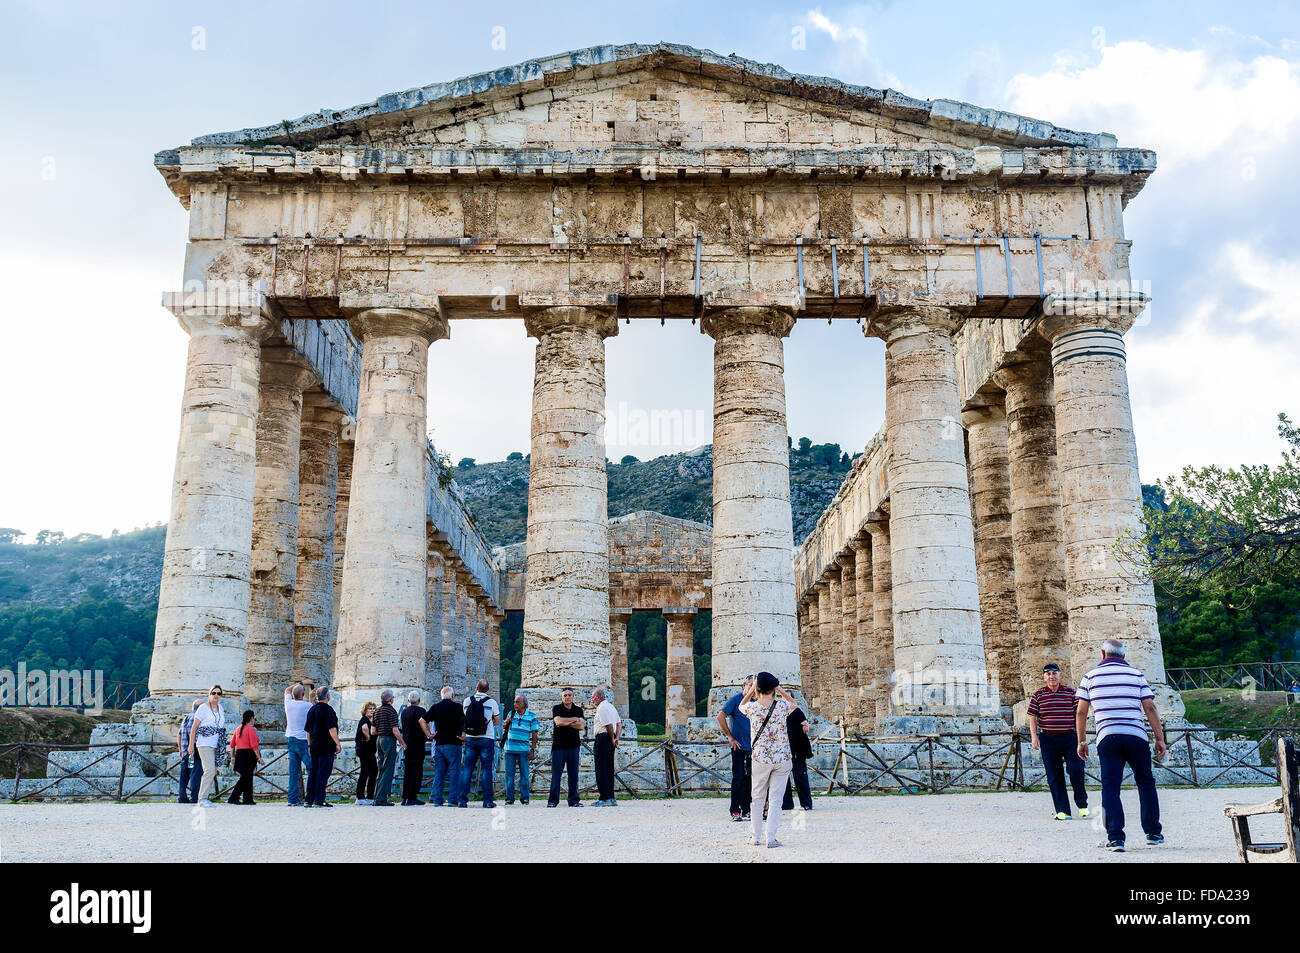 The Doric Temple at Segesta, Sicily built in late 5th century BC Stock Photo